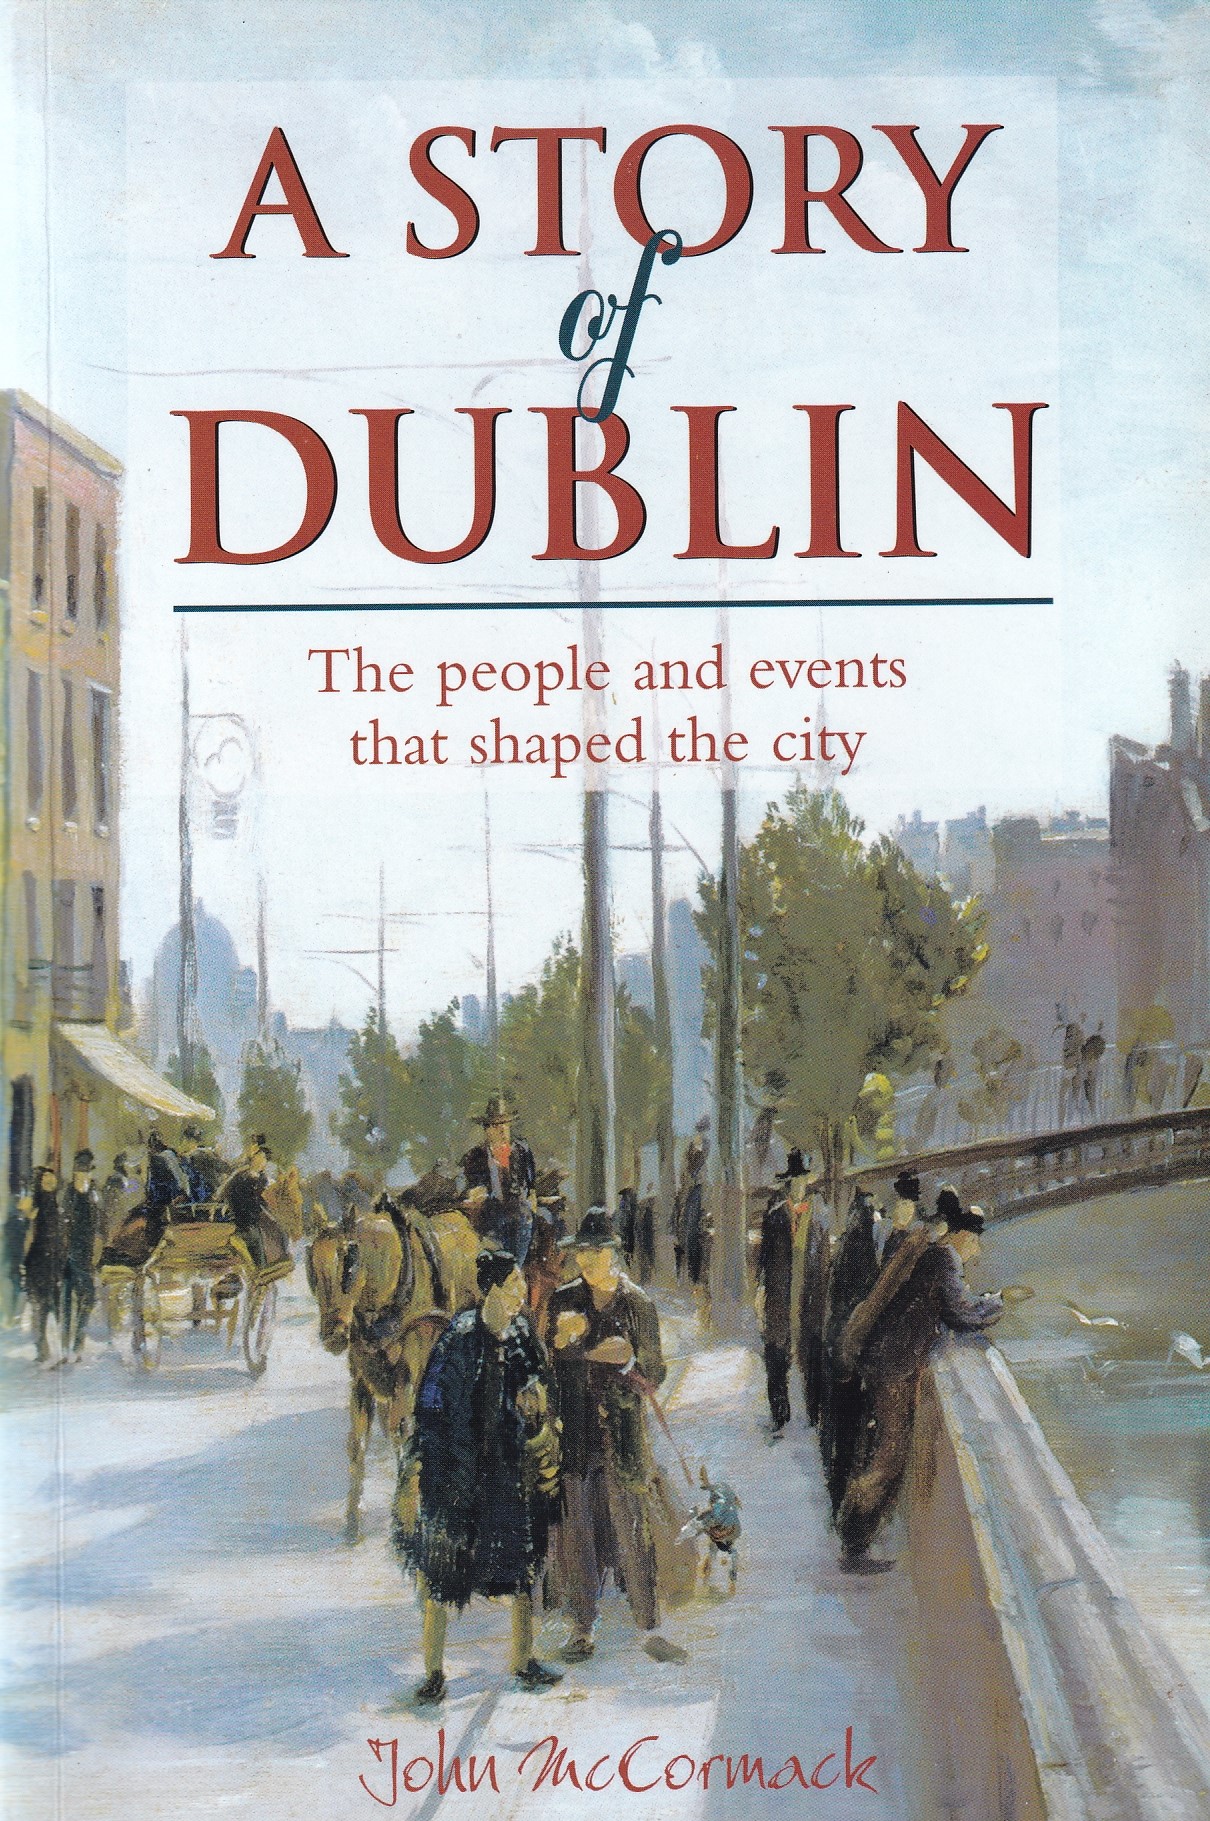 A Story of Dublin: The People and Events That Shaped the City by John McCormack